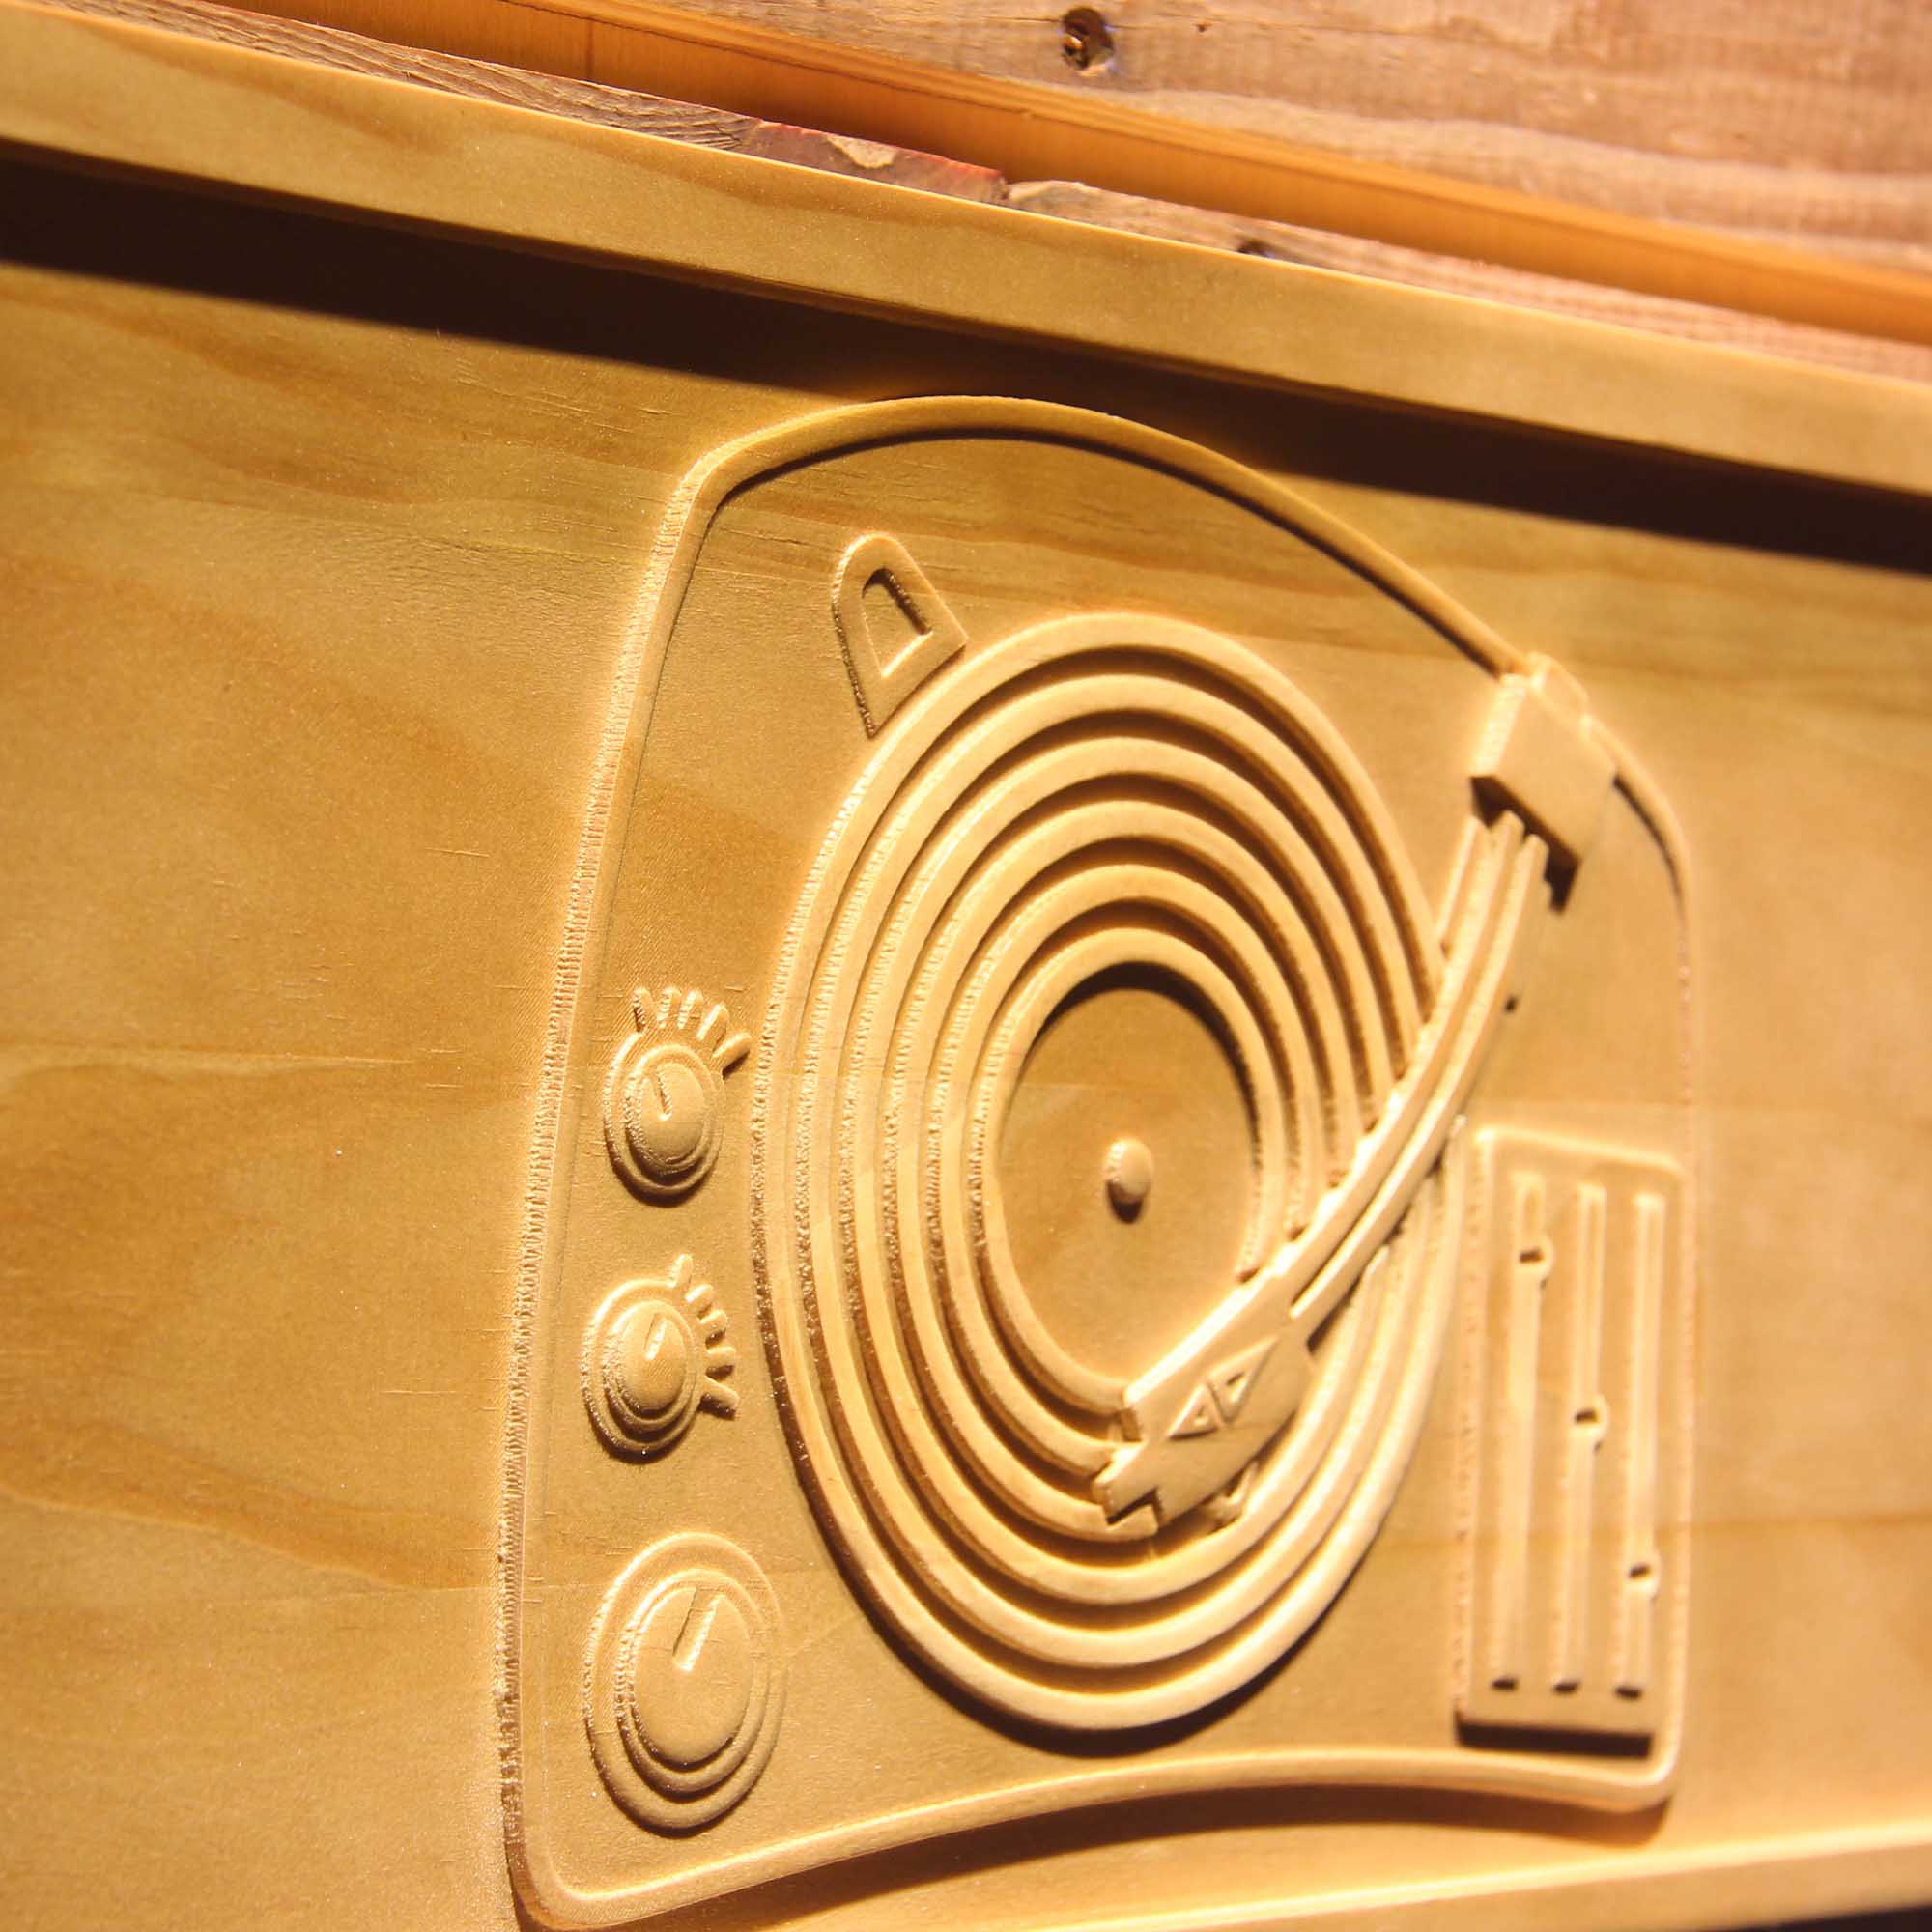 DJ Turntable Music 3D Wooden Engrave Sign